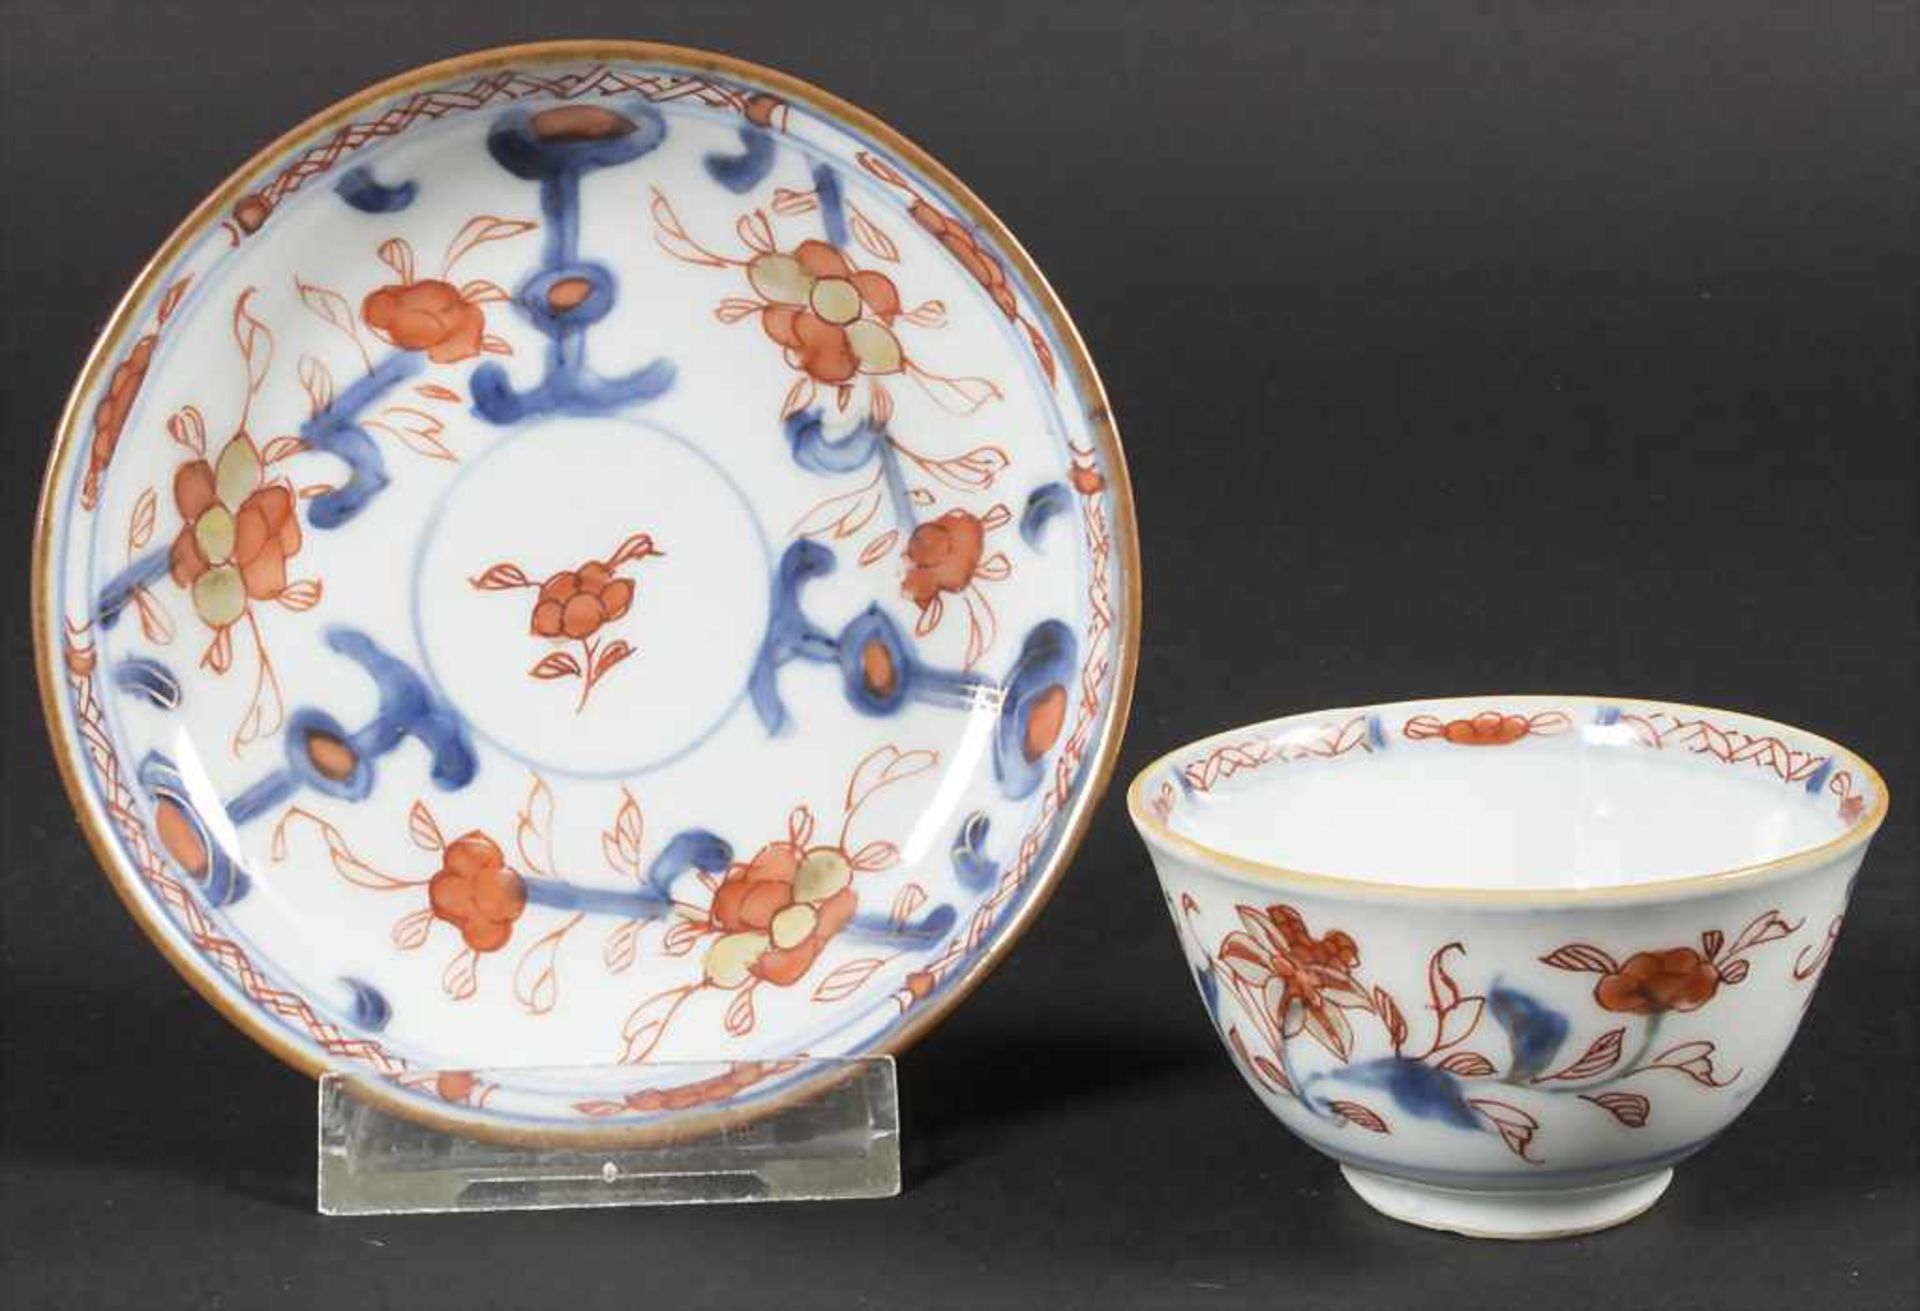 Kumme mit Unterteller / A porcelain bowl with saucer, China, Qing-Dynastie (1644-1911), wohl 18.